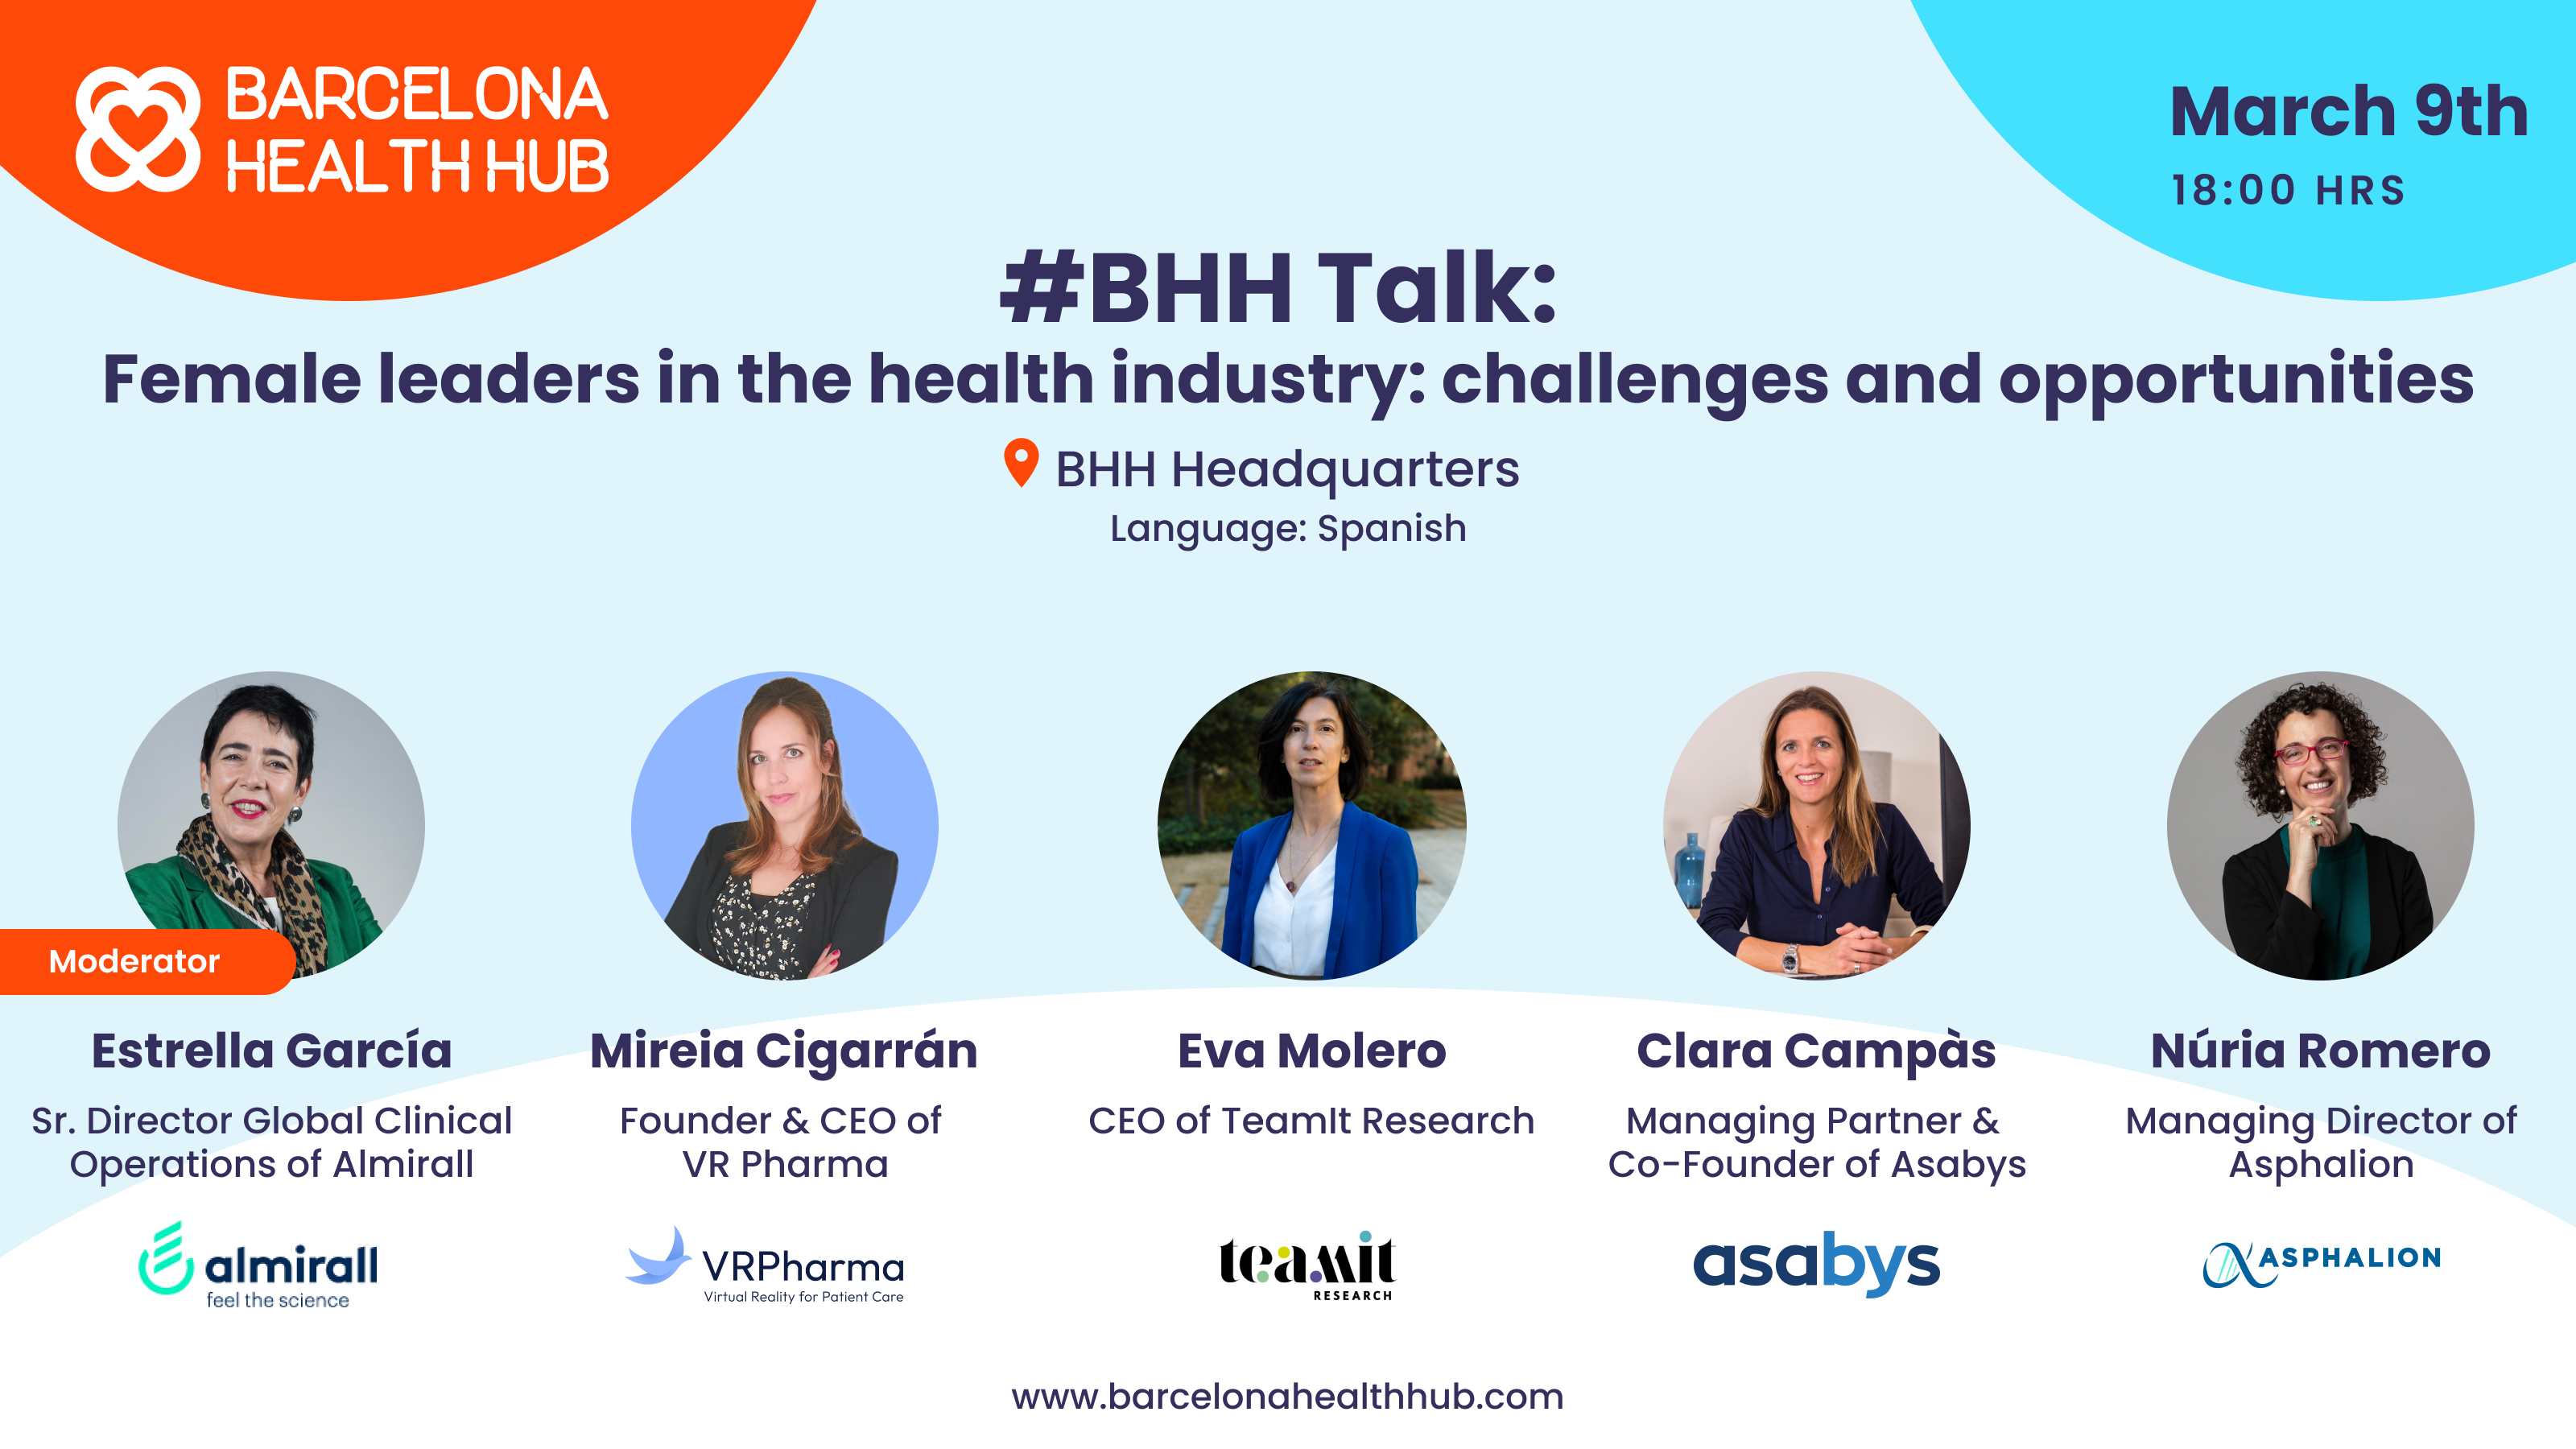 BHH Women’s Week - Join the #BHHTalk about “Female leaders in the health industry: challenges and opportunities”